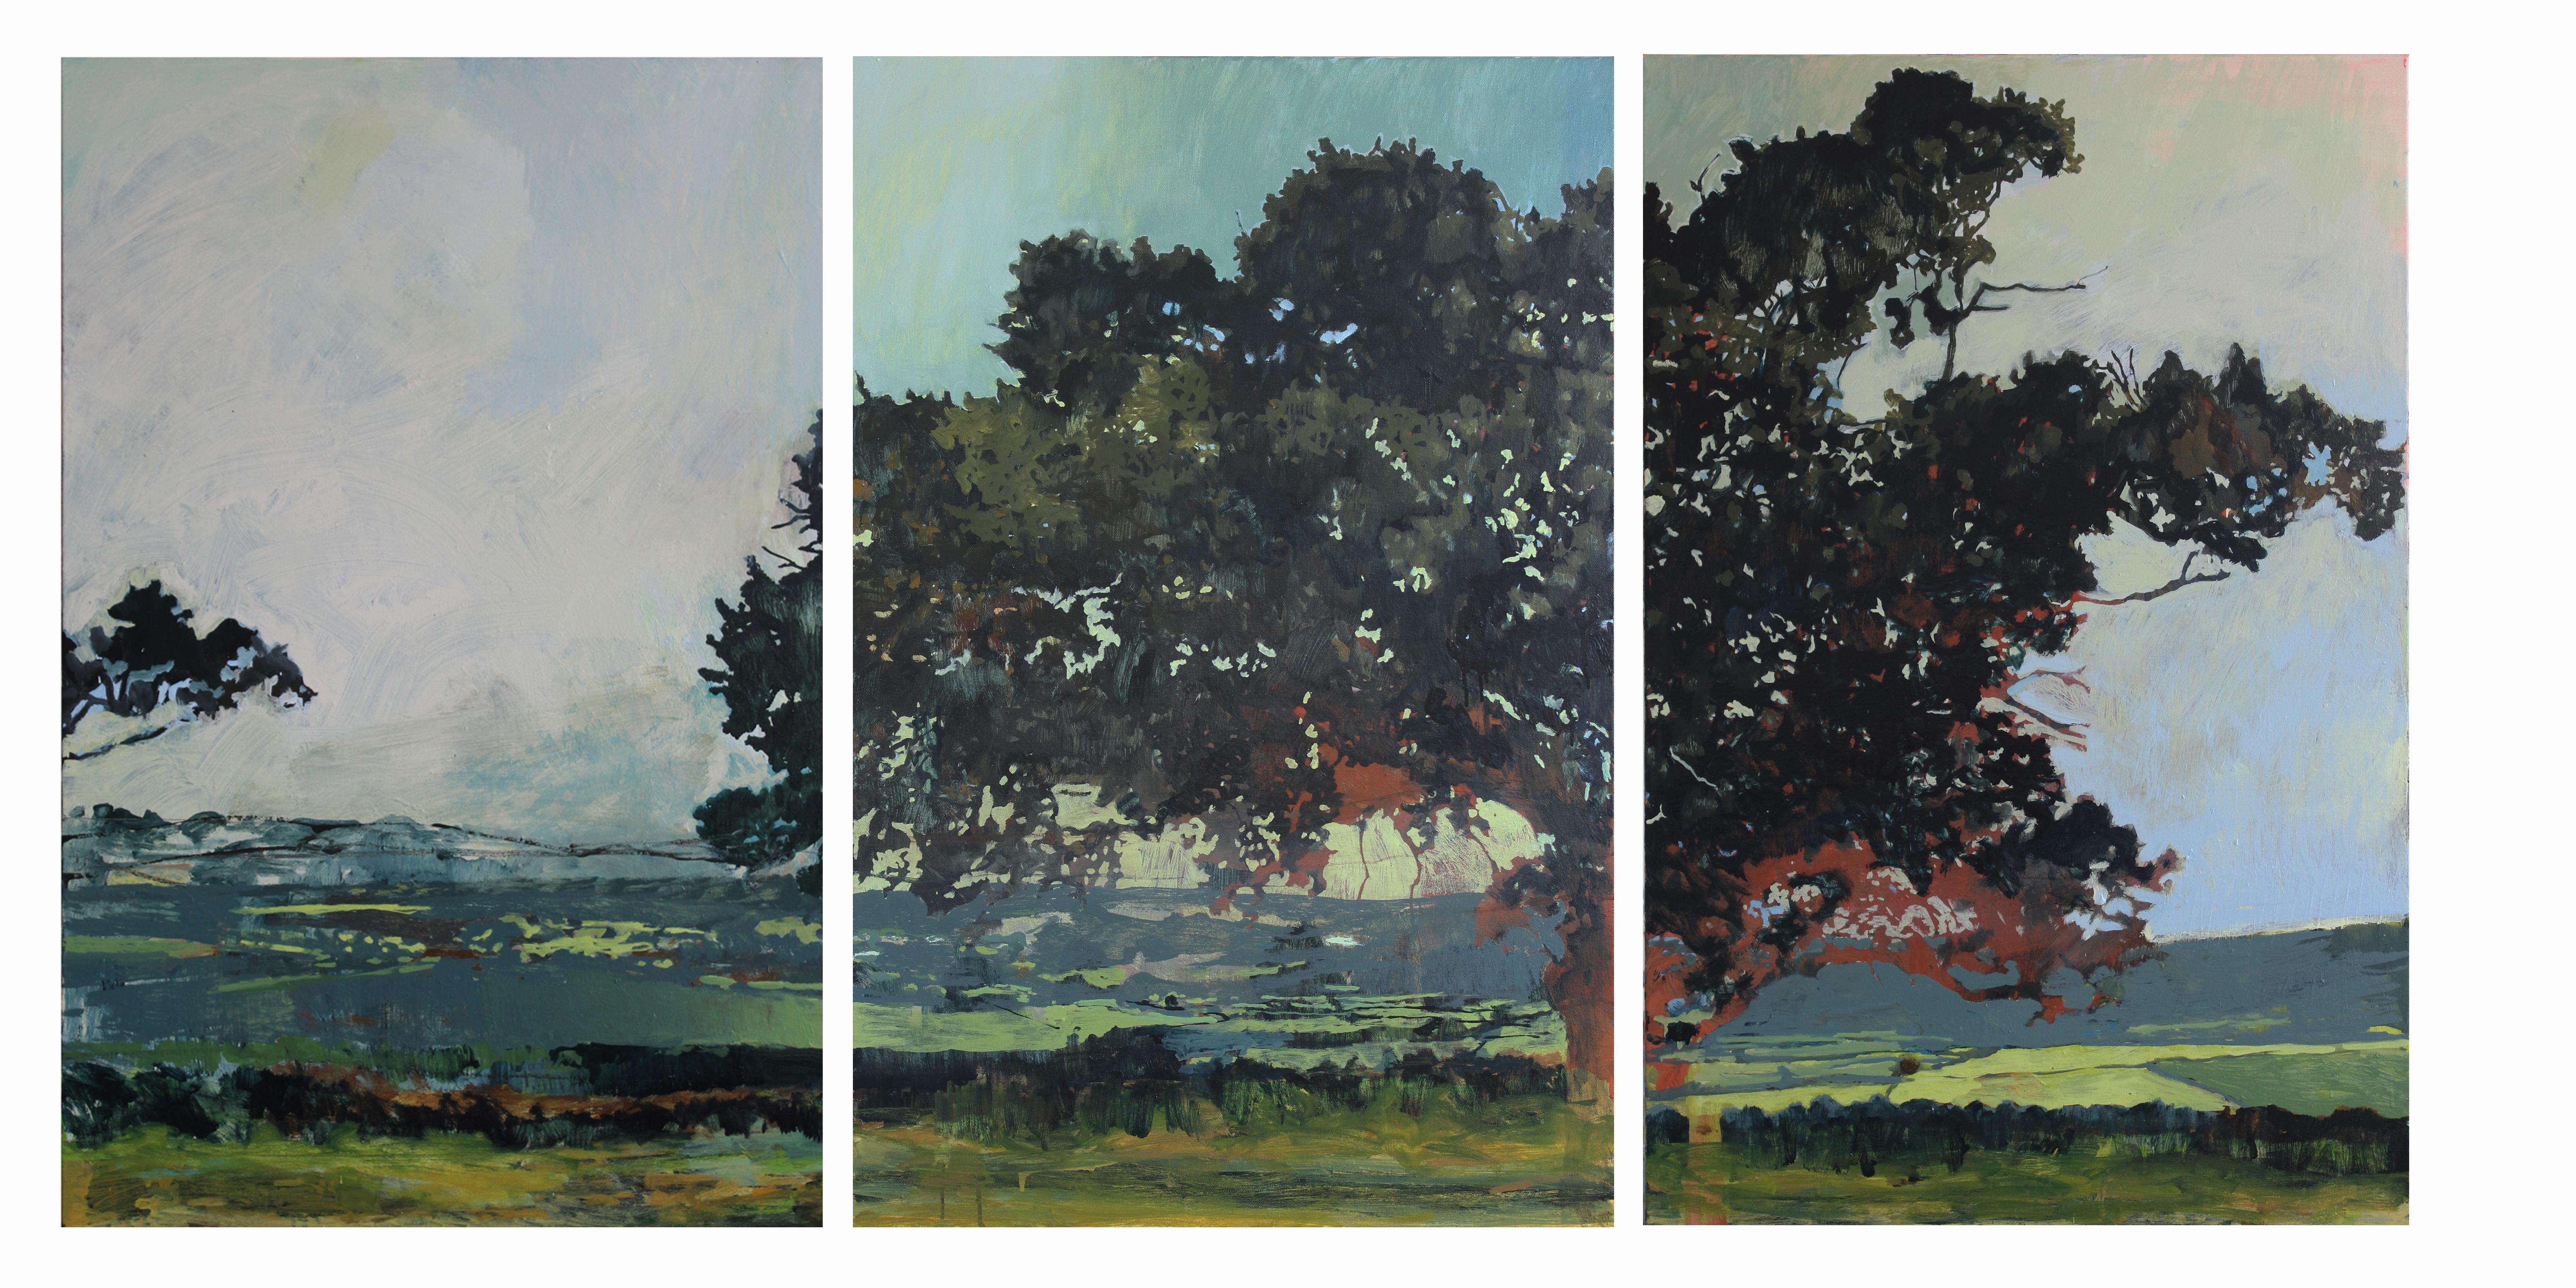 Every Tree I Have Ever Seen (Blackdown Hills Oak) 2, Triptych, framed in a single frame

These works are responses to the ancient oaks which populate the hills, near Sara's studio where she walks, breathes and explores her own local terrain.  She